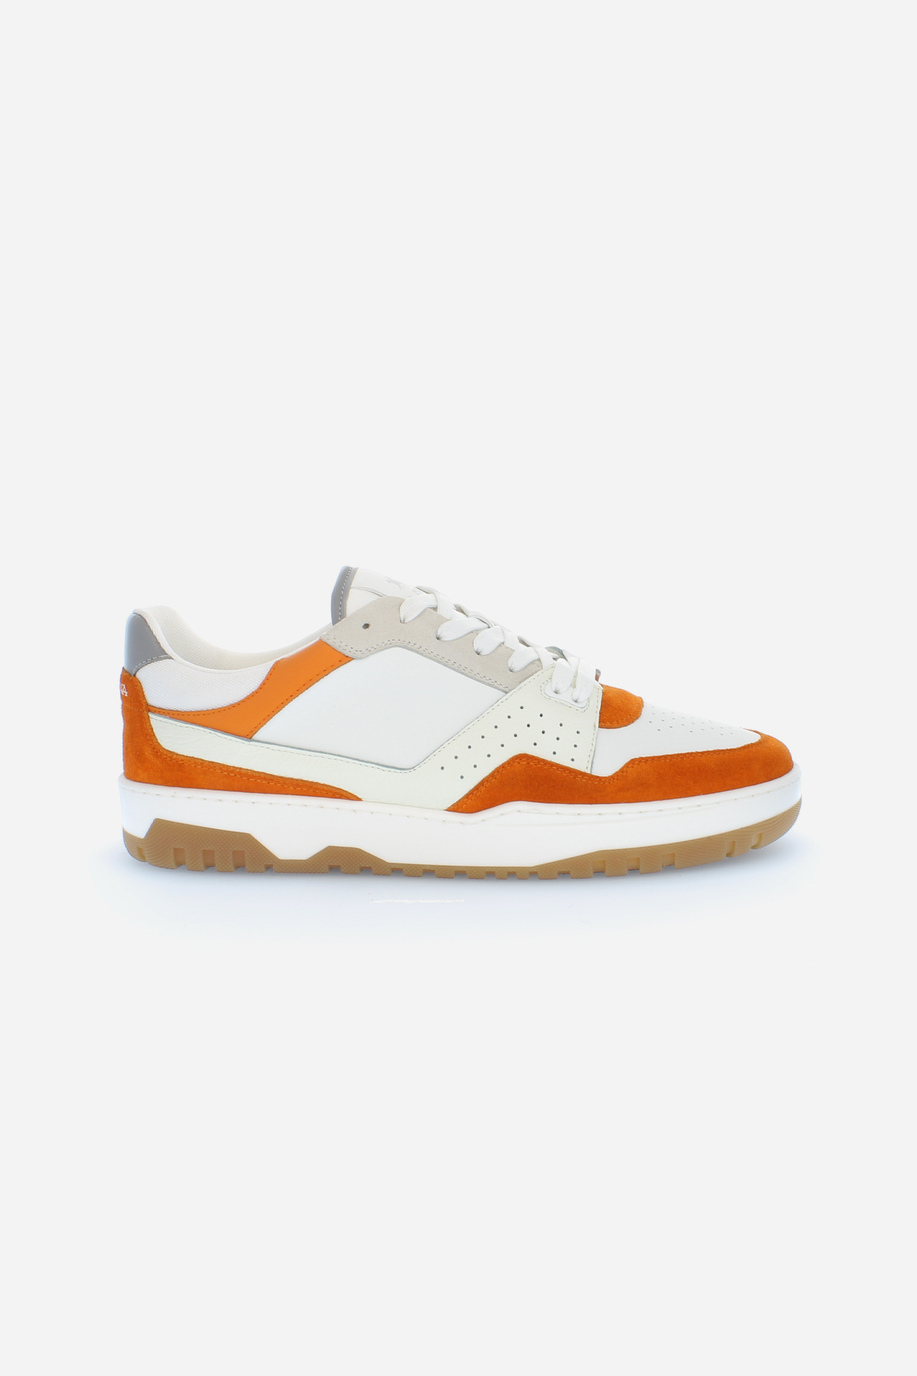 New vintage men's basketball sneaker in mixed vegetable leather - Field 85 - Sneakers Field 85 | La Martina - Official Online Shop